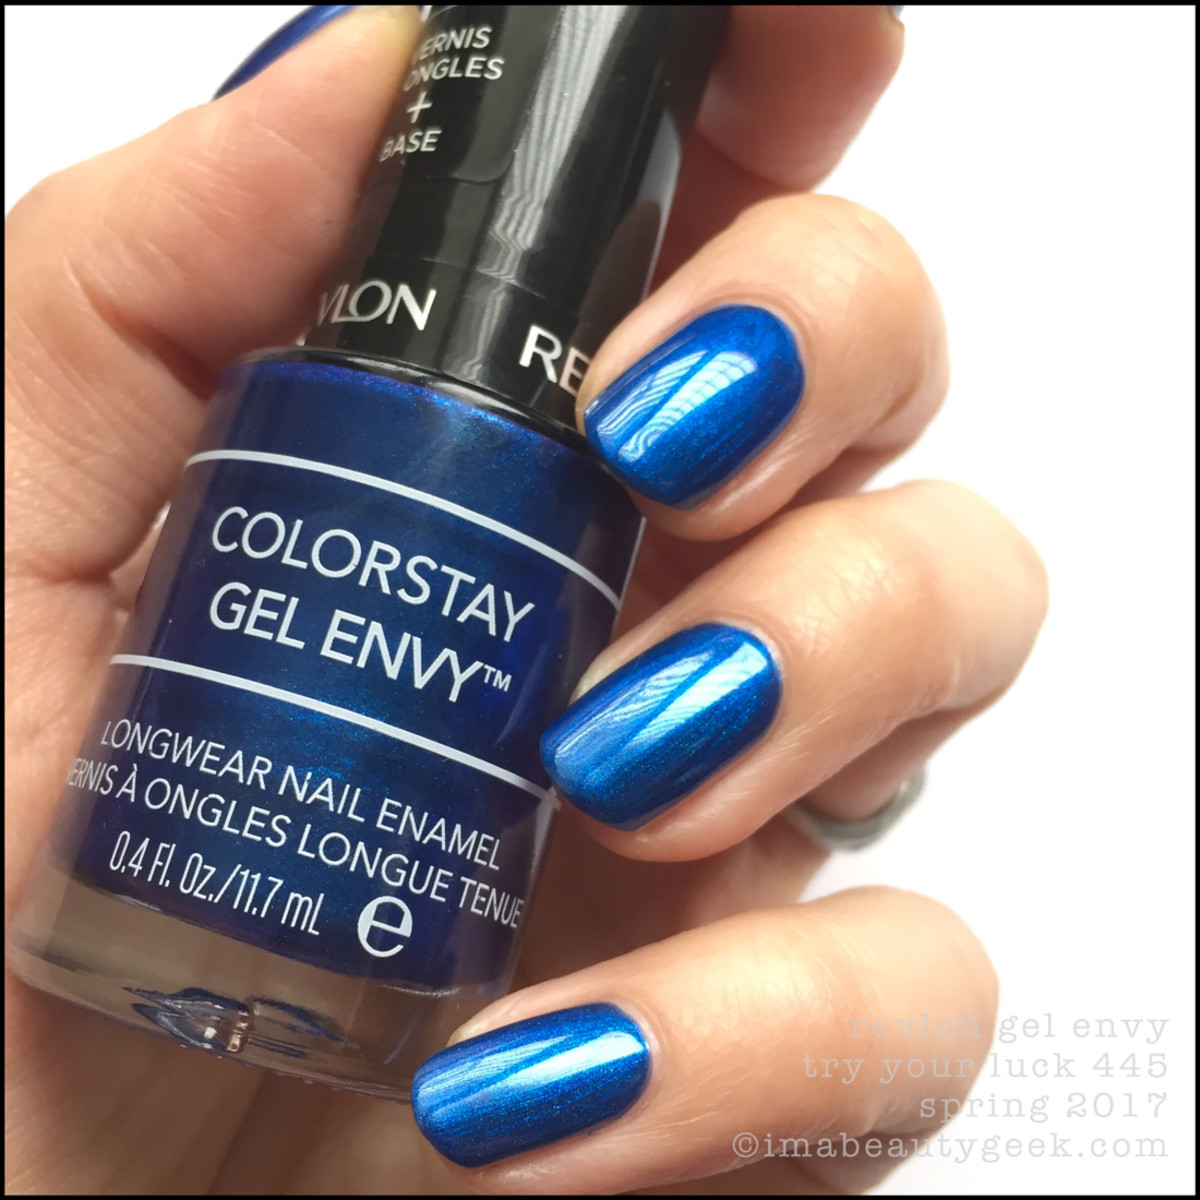 Revlon Try Your Luck Gel Envy Nail Polish Swatches